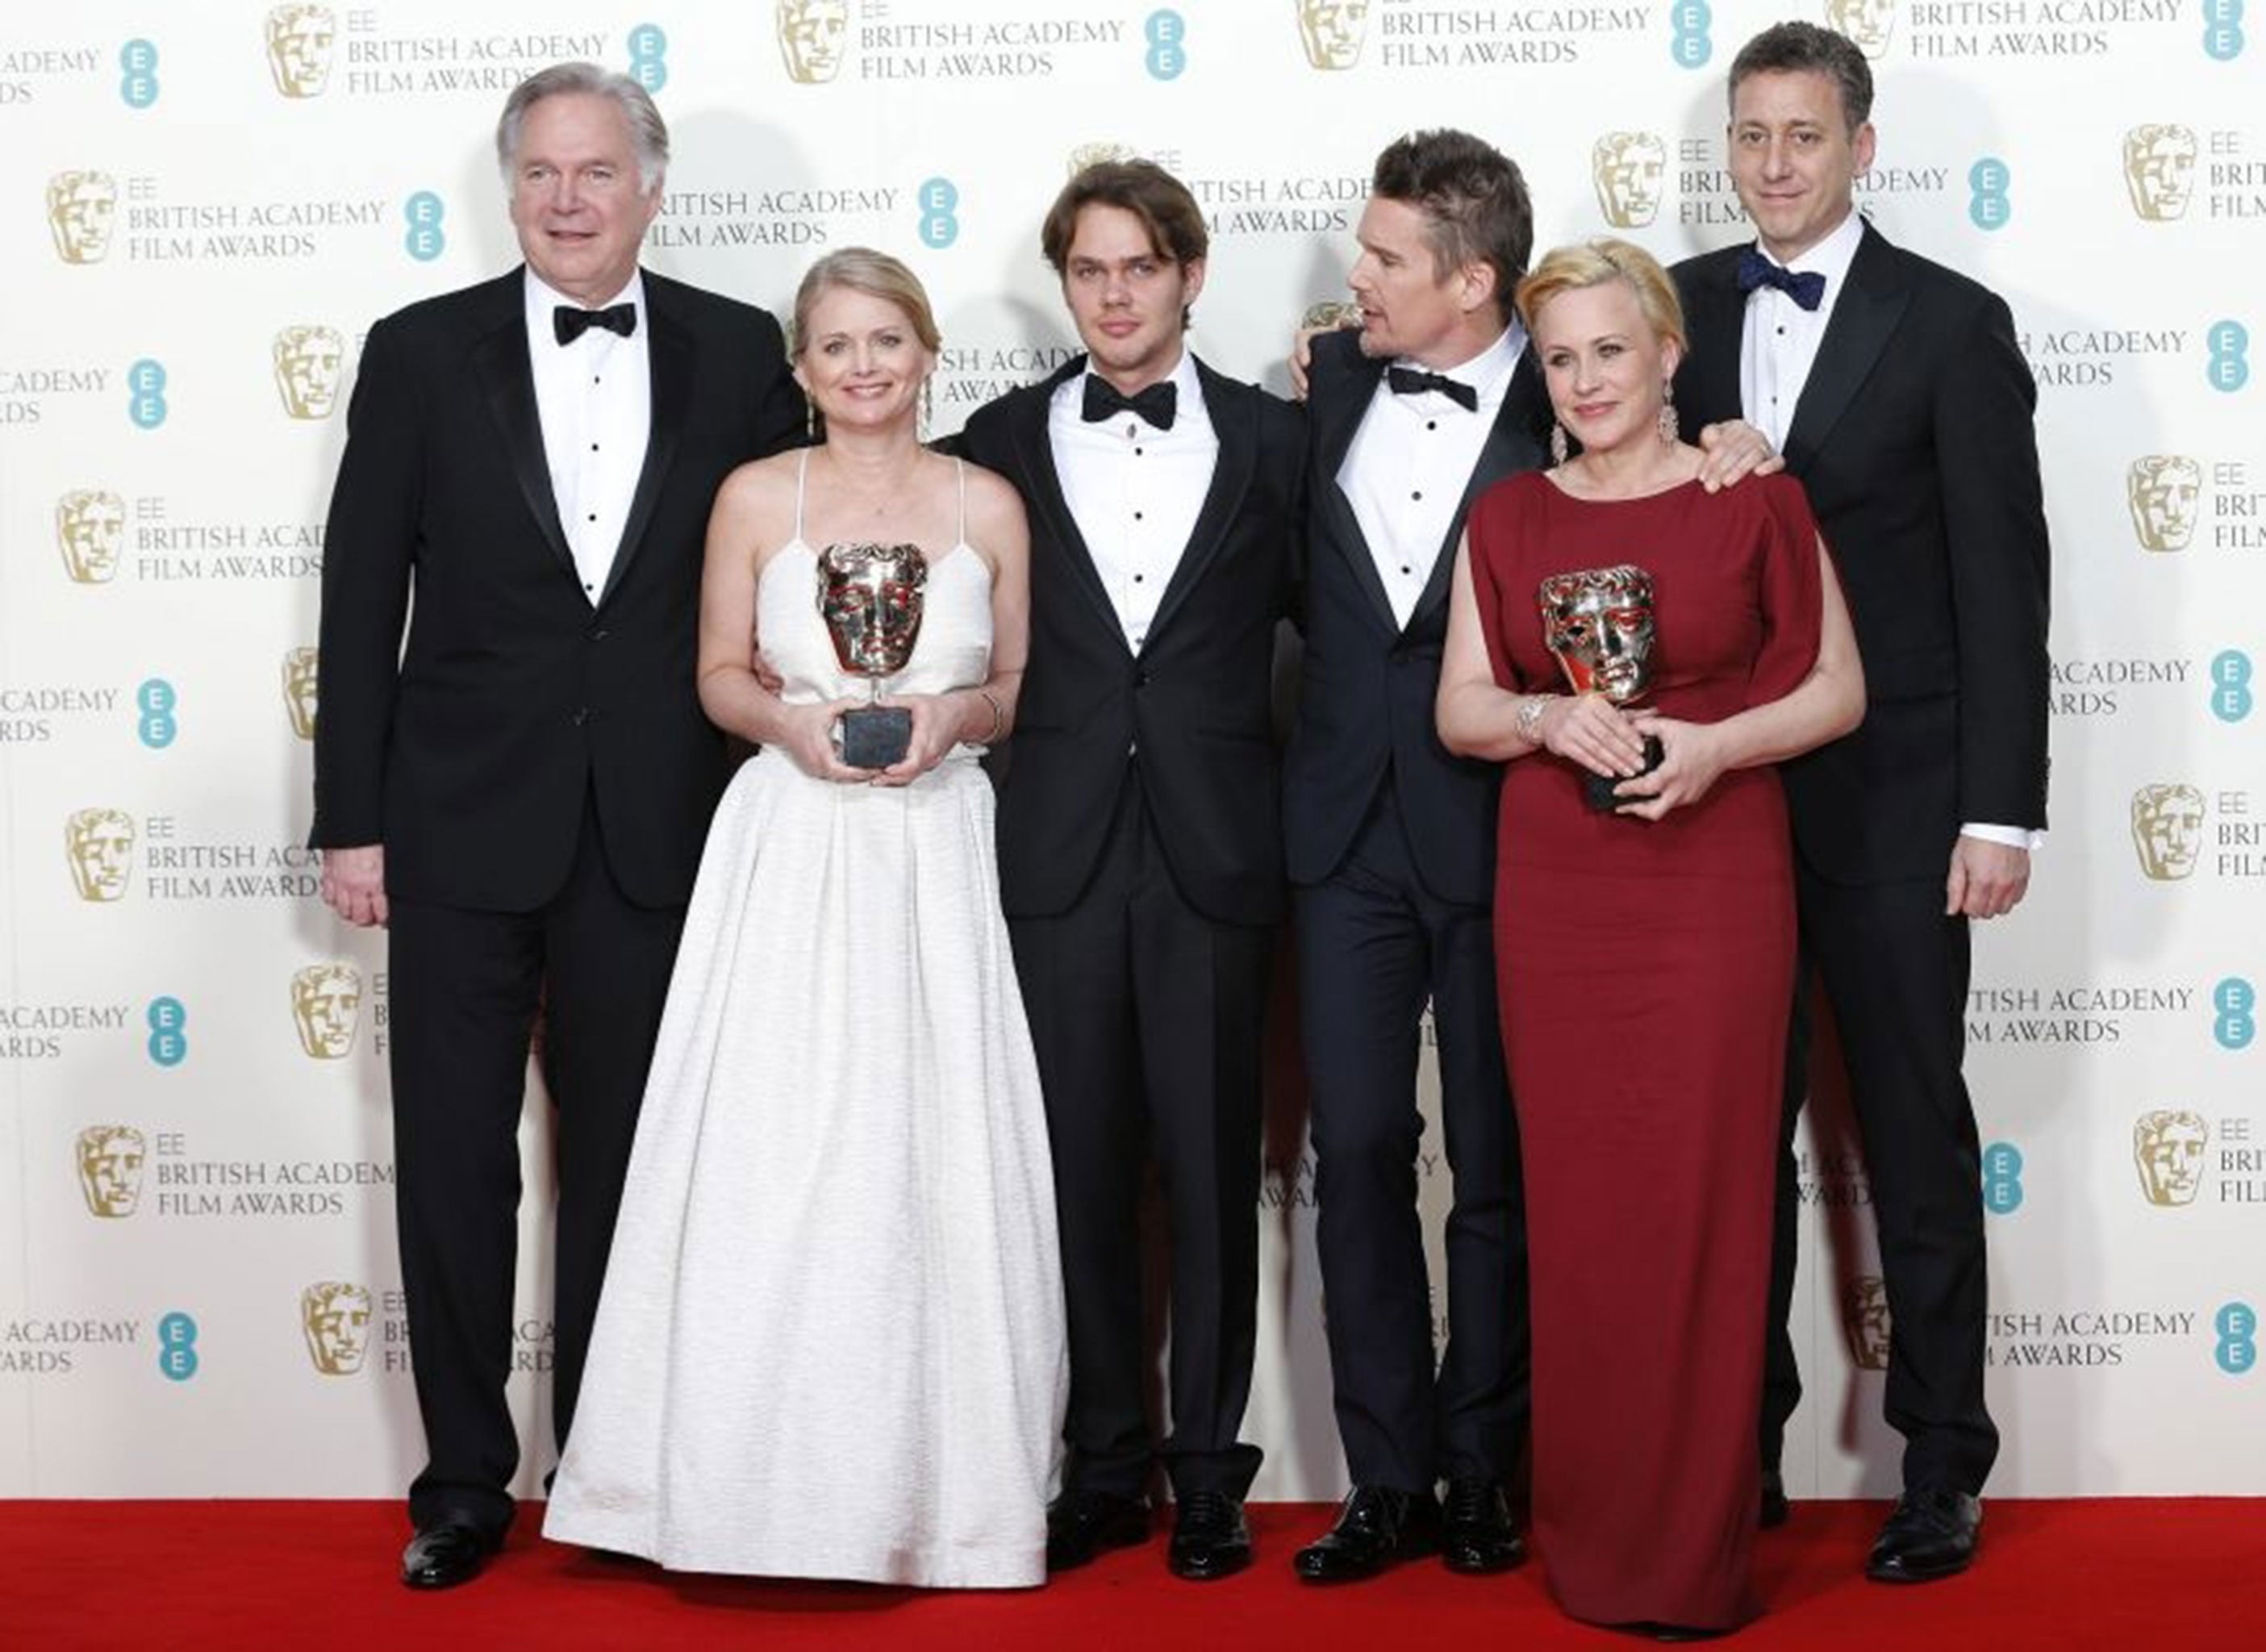 (Left to right) Jonathan Sehring, Cathleen Sutherland, Ellar Coltrane, Ethan Hawke, Patricia Arquette and John Sloss celebrate after winning the best film award for Boyhood at the Baftas